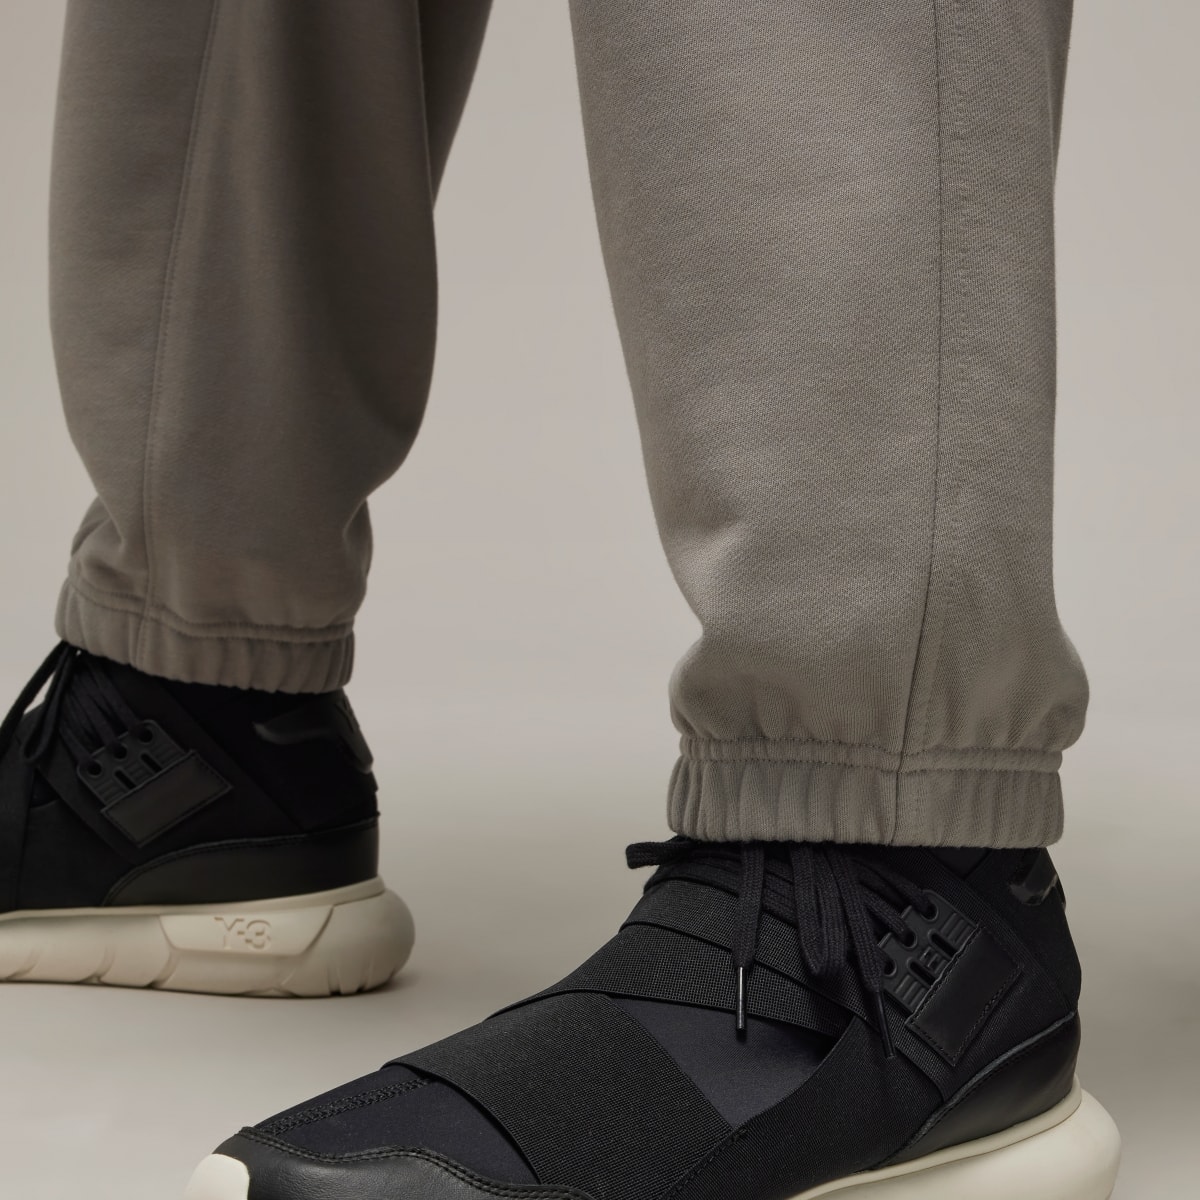 Adidas Y-3 French Terry Track Pants. 7